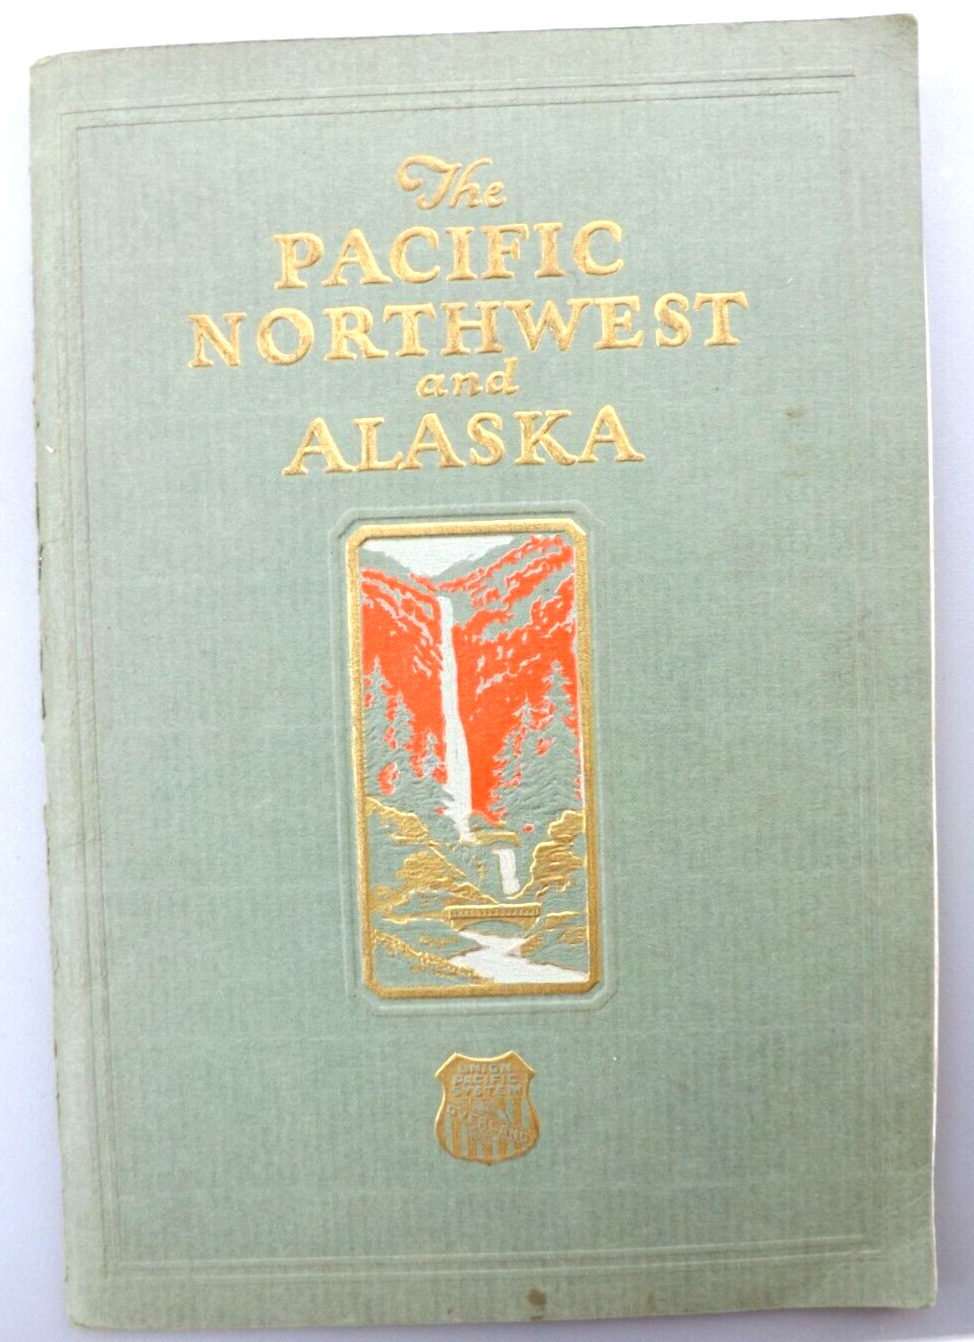 1924 UNION PACIFIC RAILROAD PACIFIC NORTHWEST & ALASKA 46 PAGE BOOKLET WITH MAPS